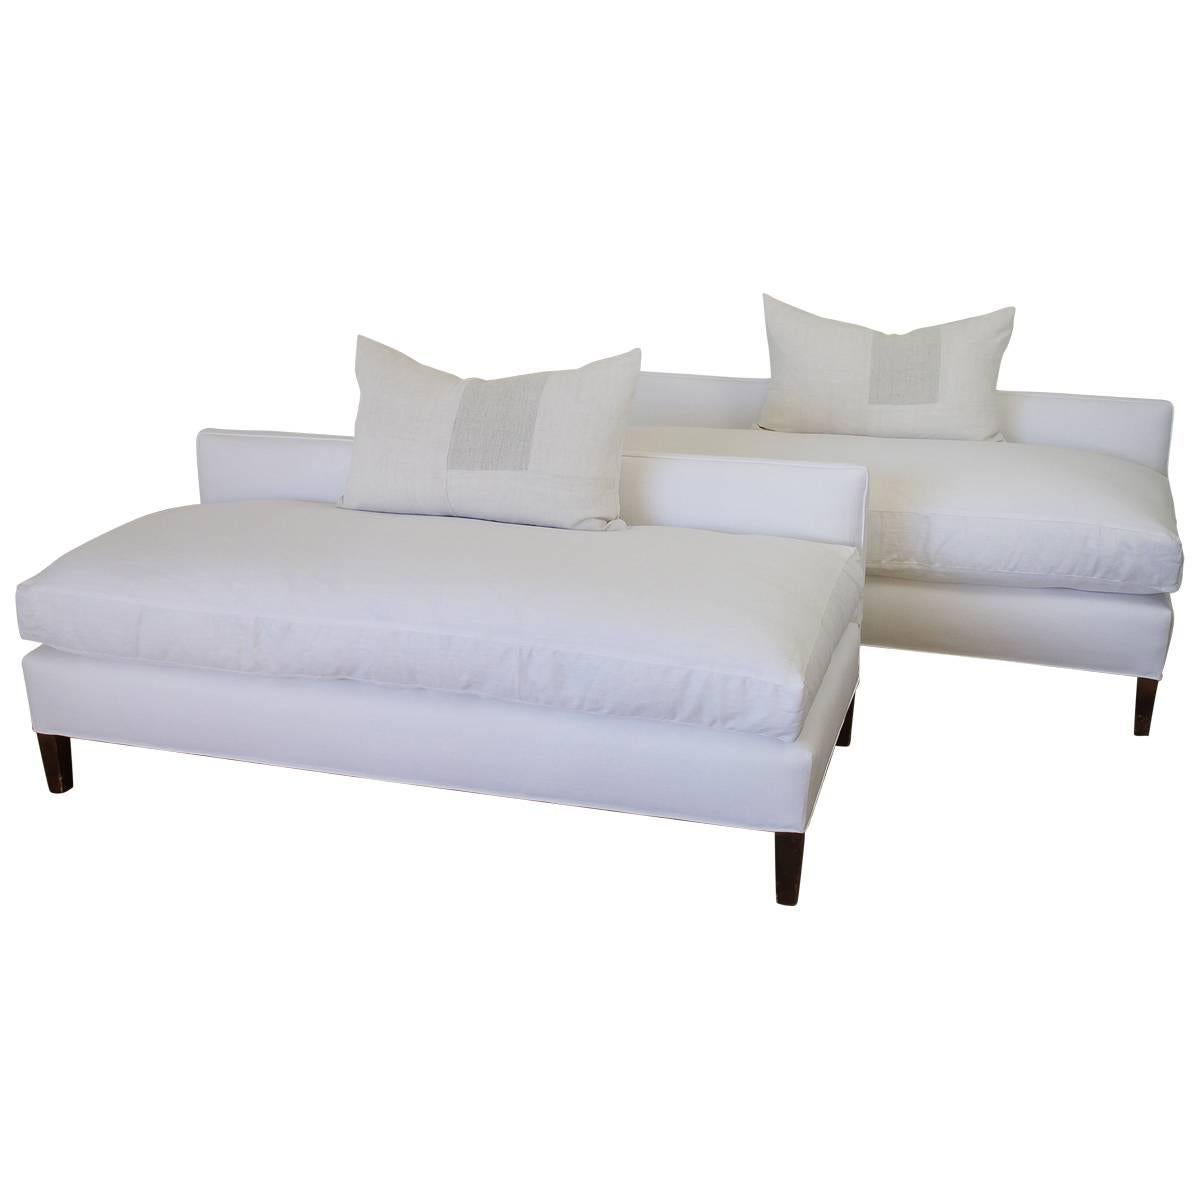 Mid-Century Modern White Linen Upholstered Bench with Down Cushion